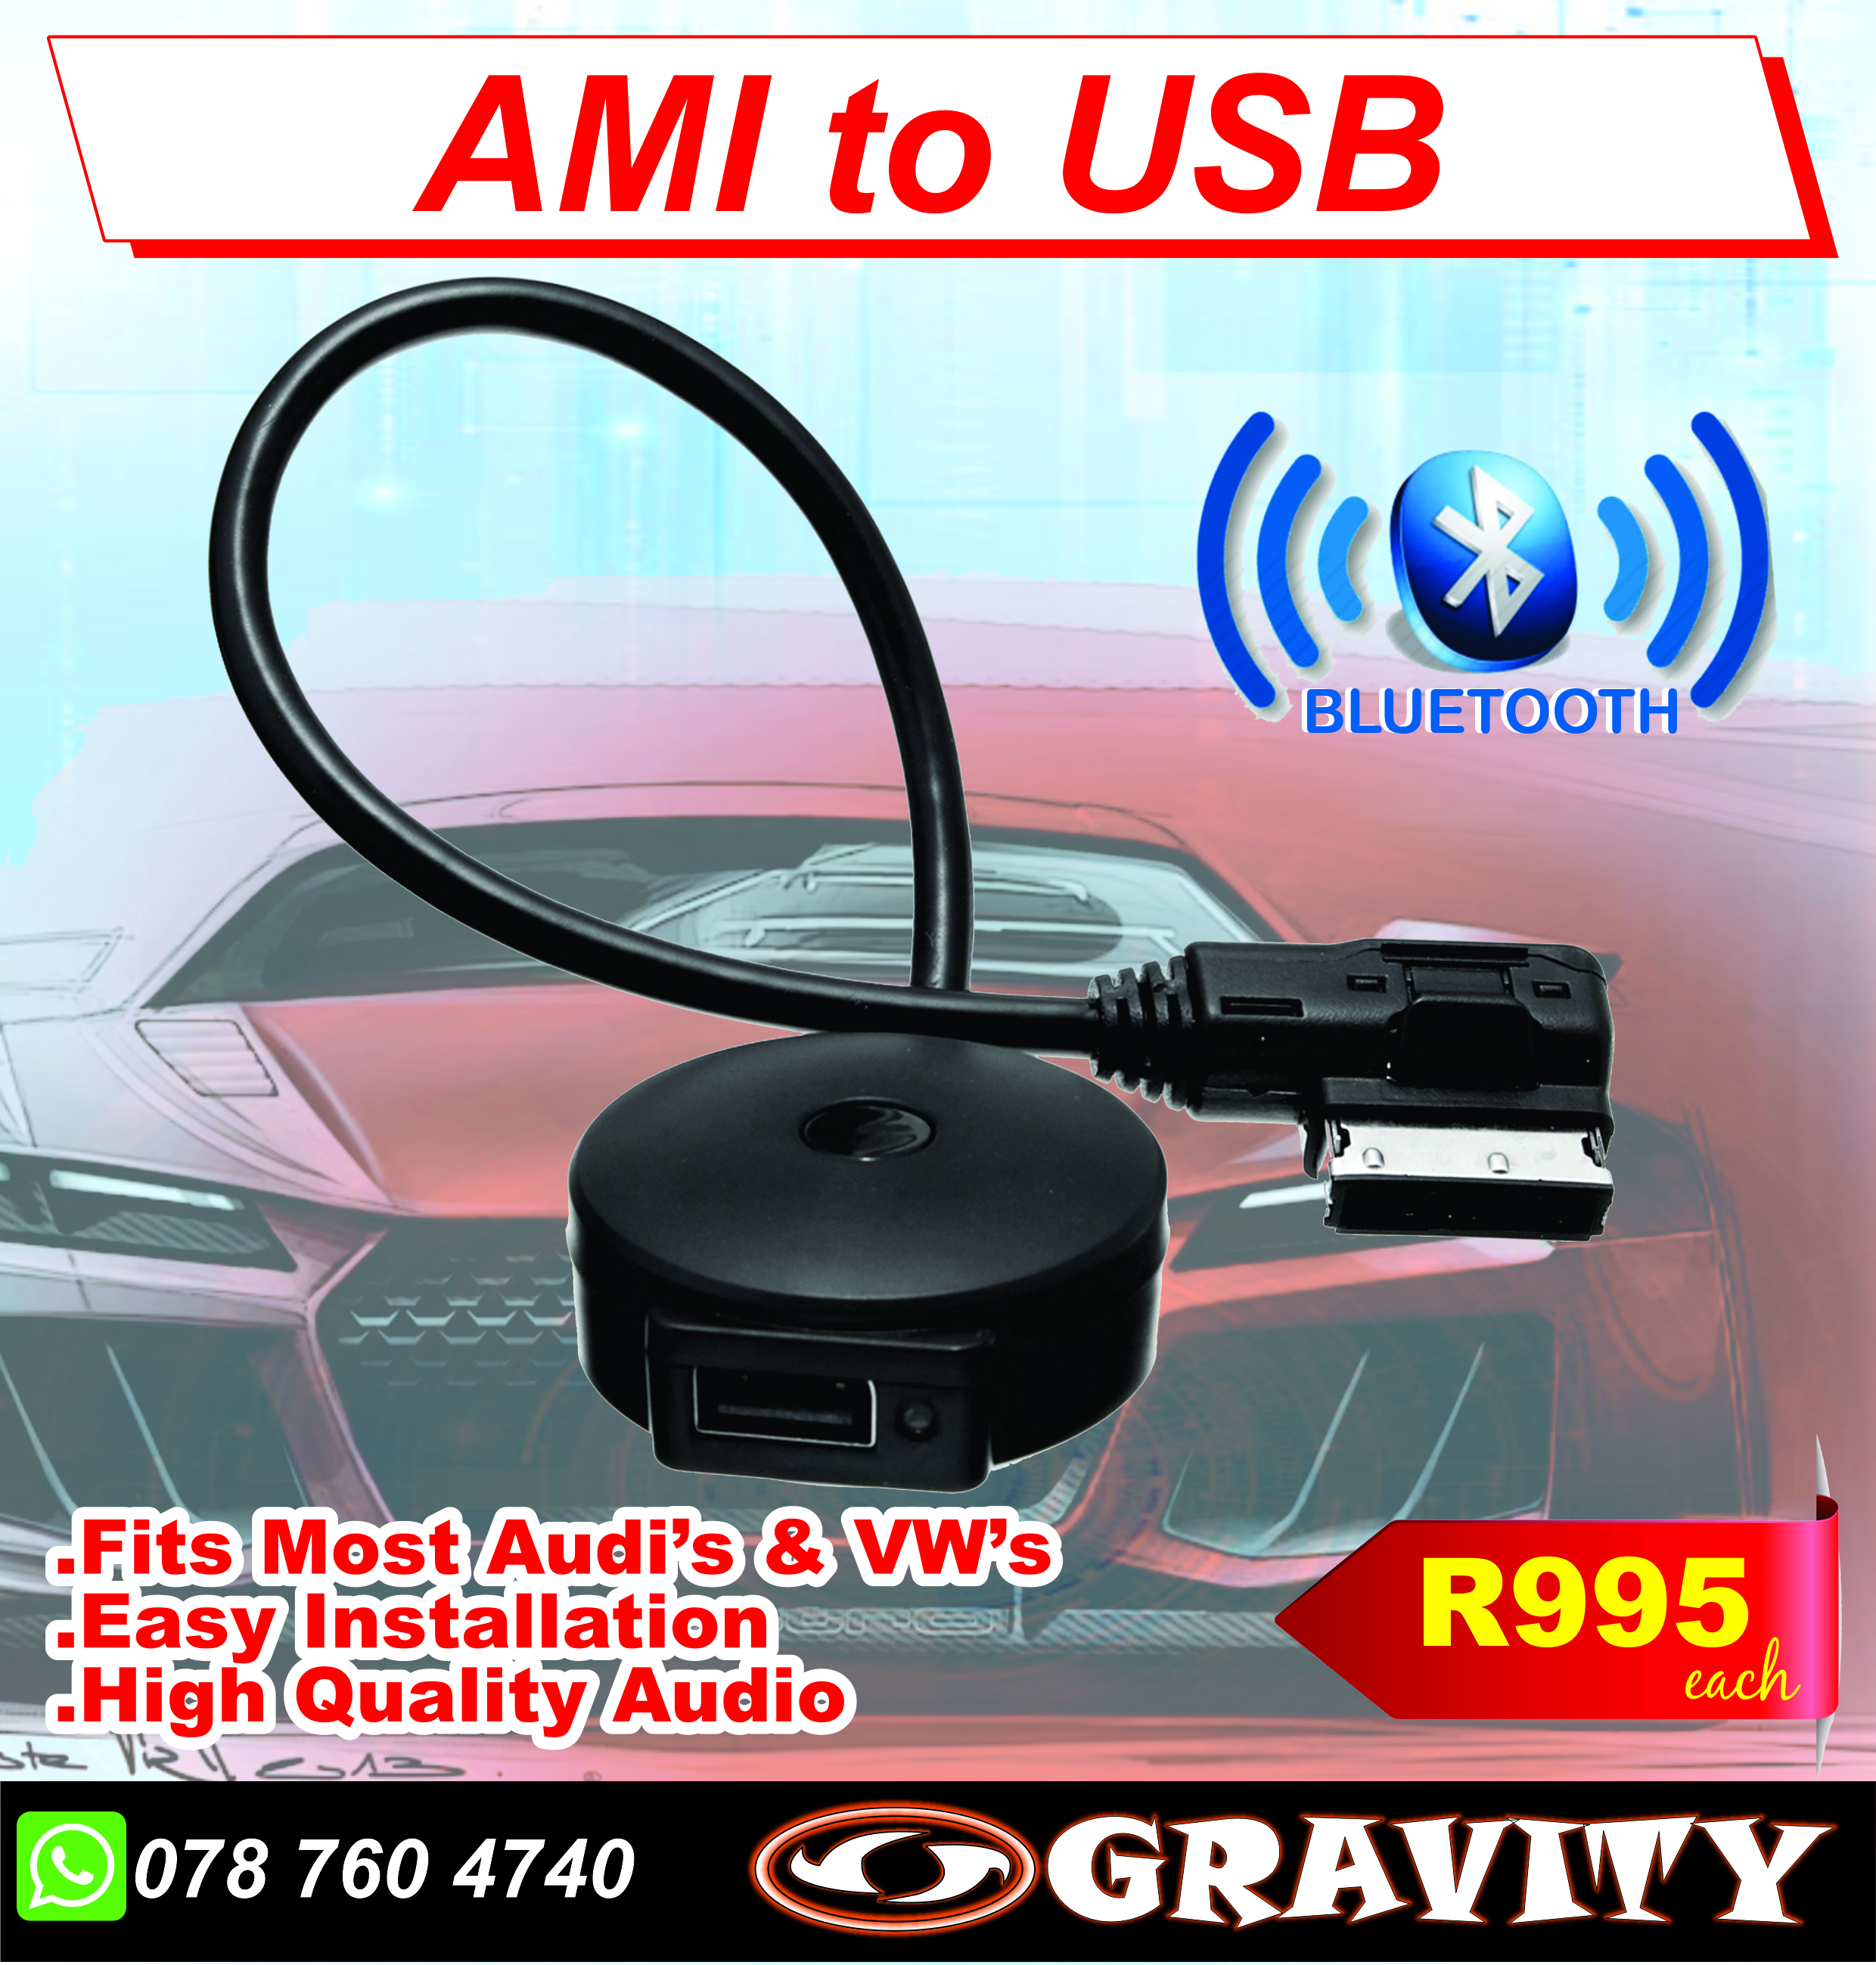 vw ami cable | audi ami cable | usb ami cable | bluetooth ami cable durban gravity